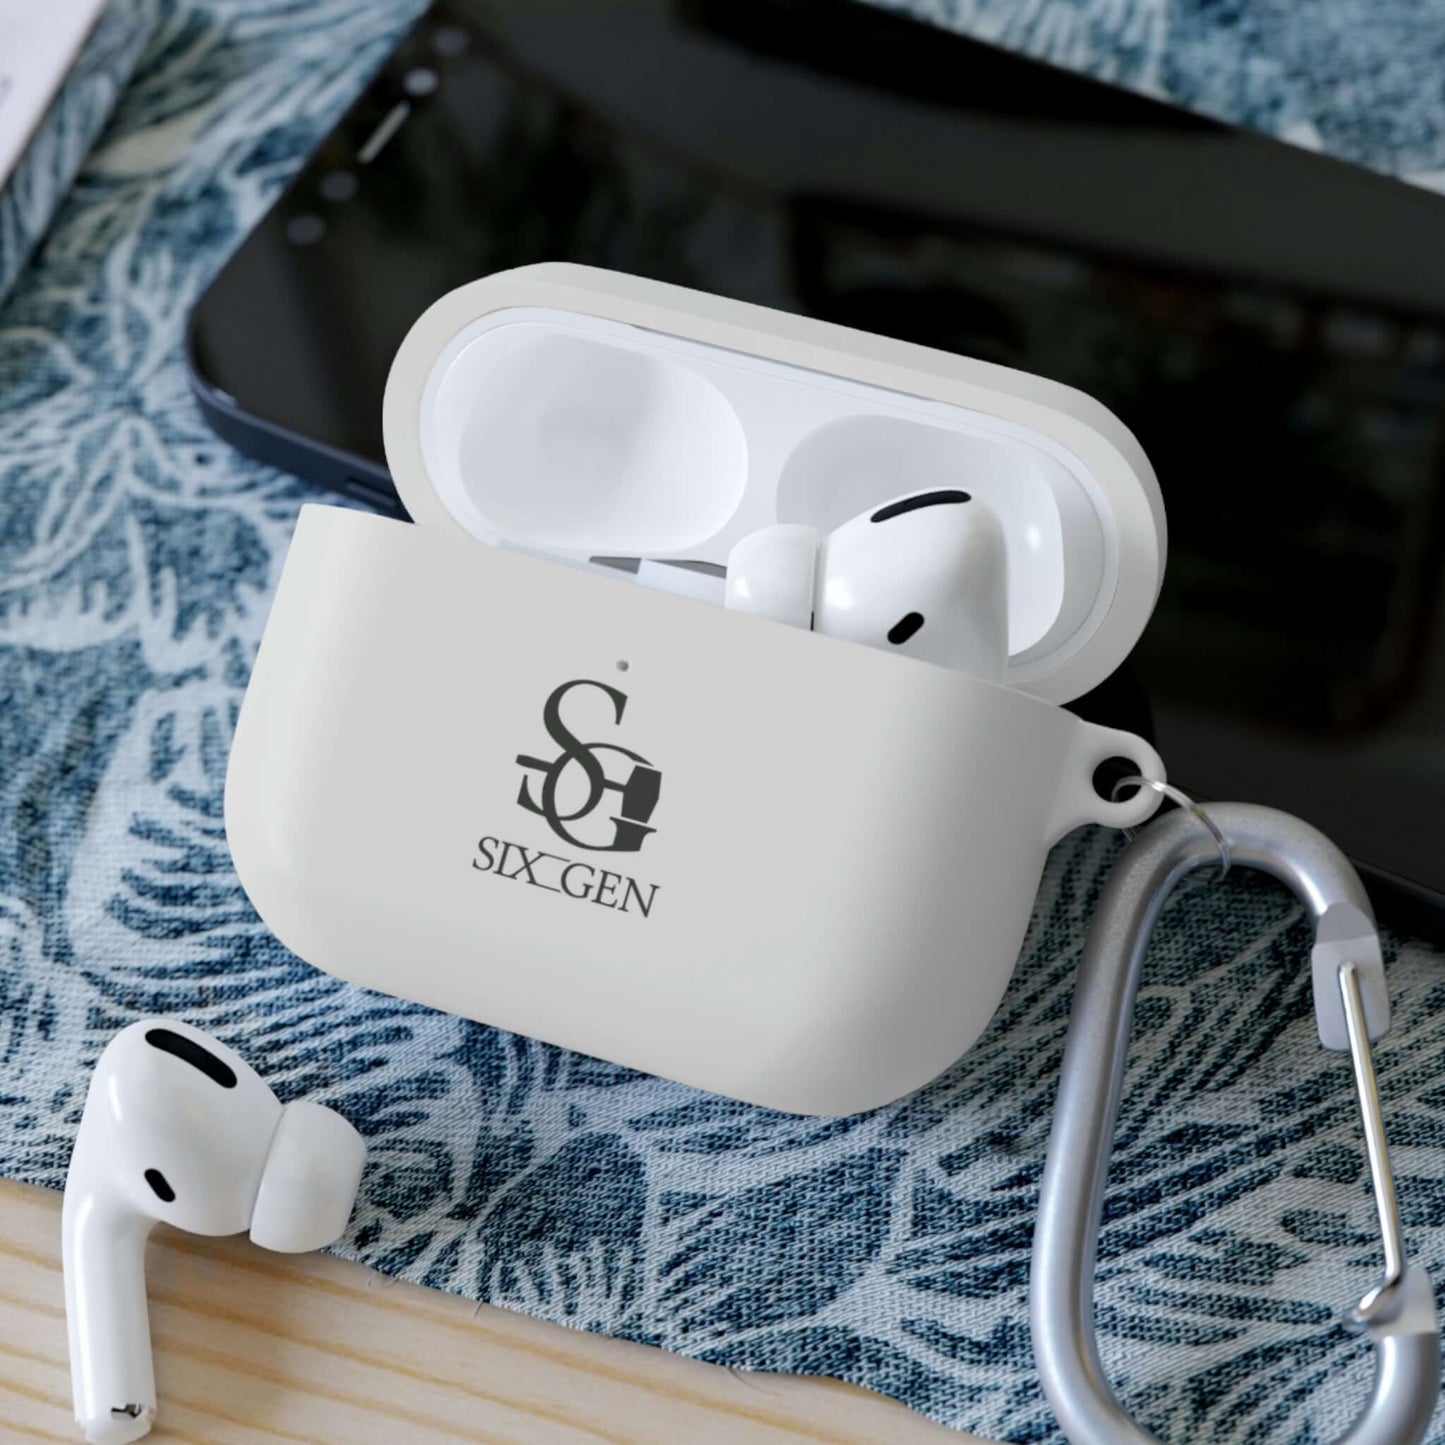 Air Pod Case with white cover with Six-Gen Forge Logo